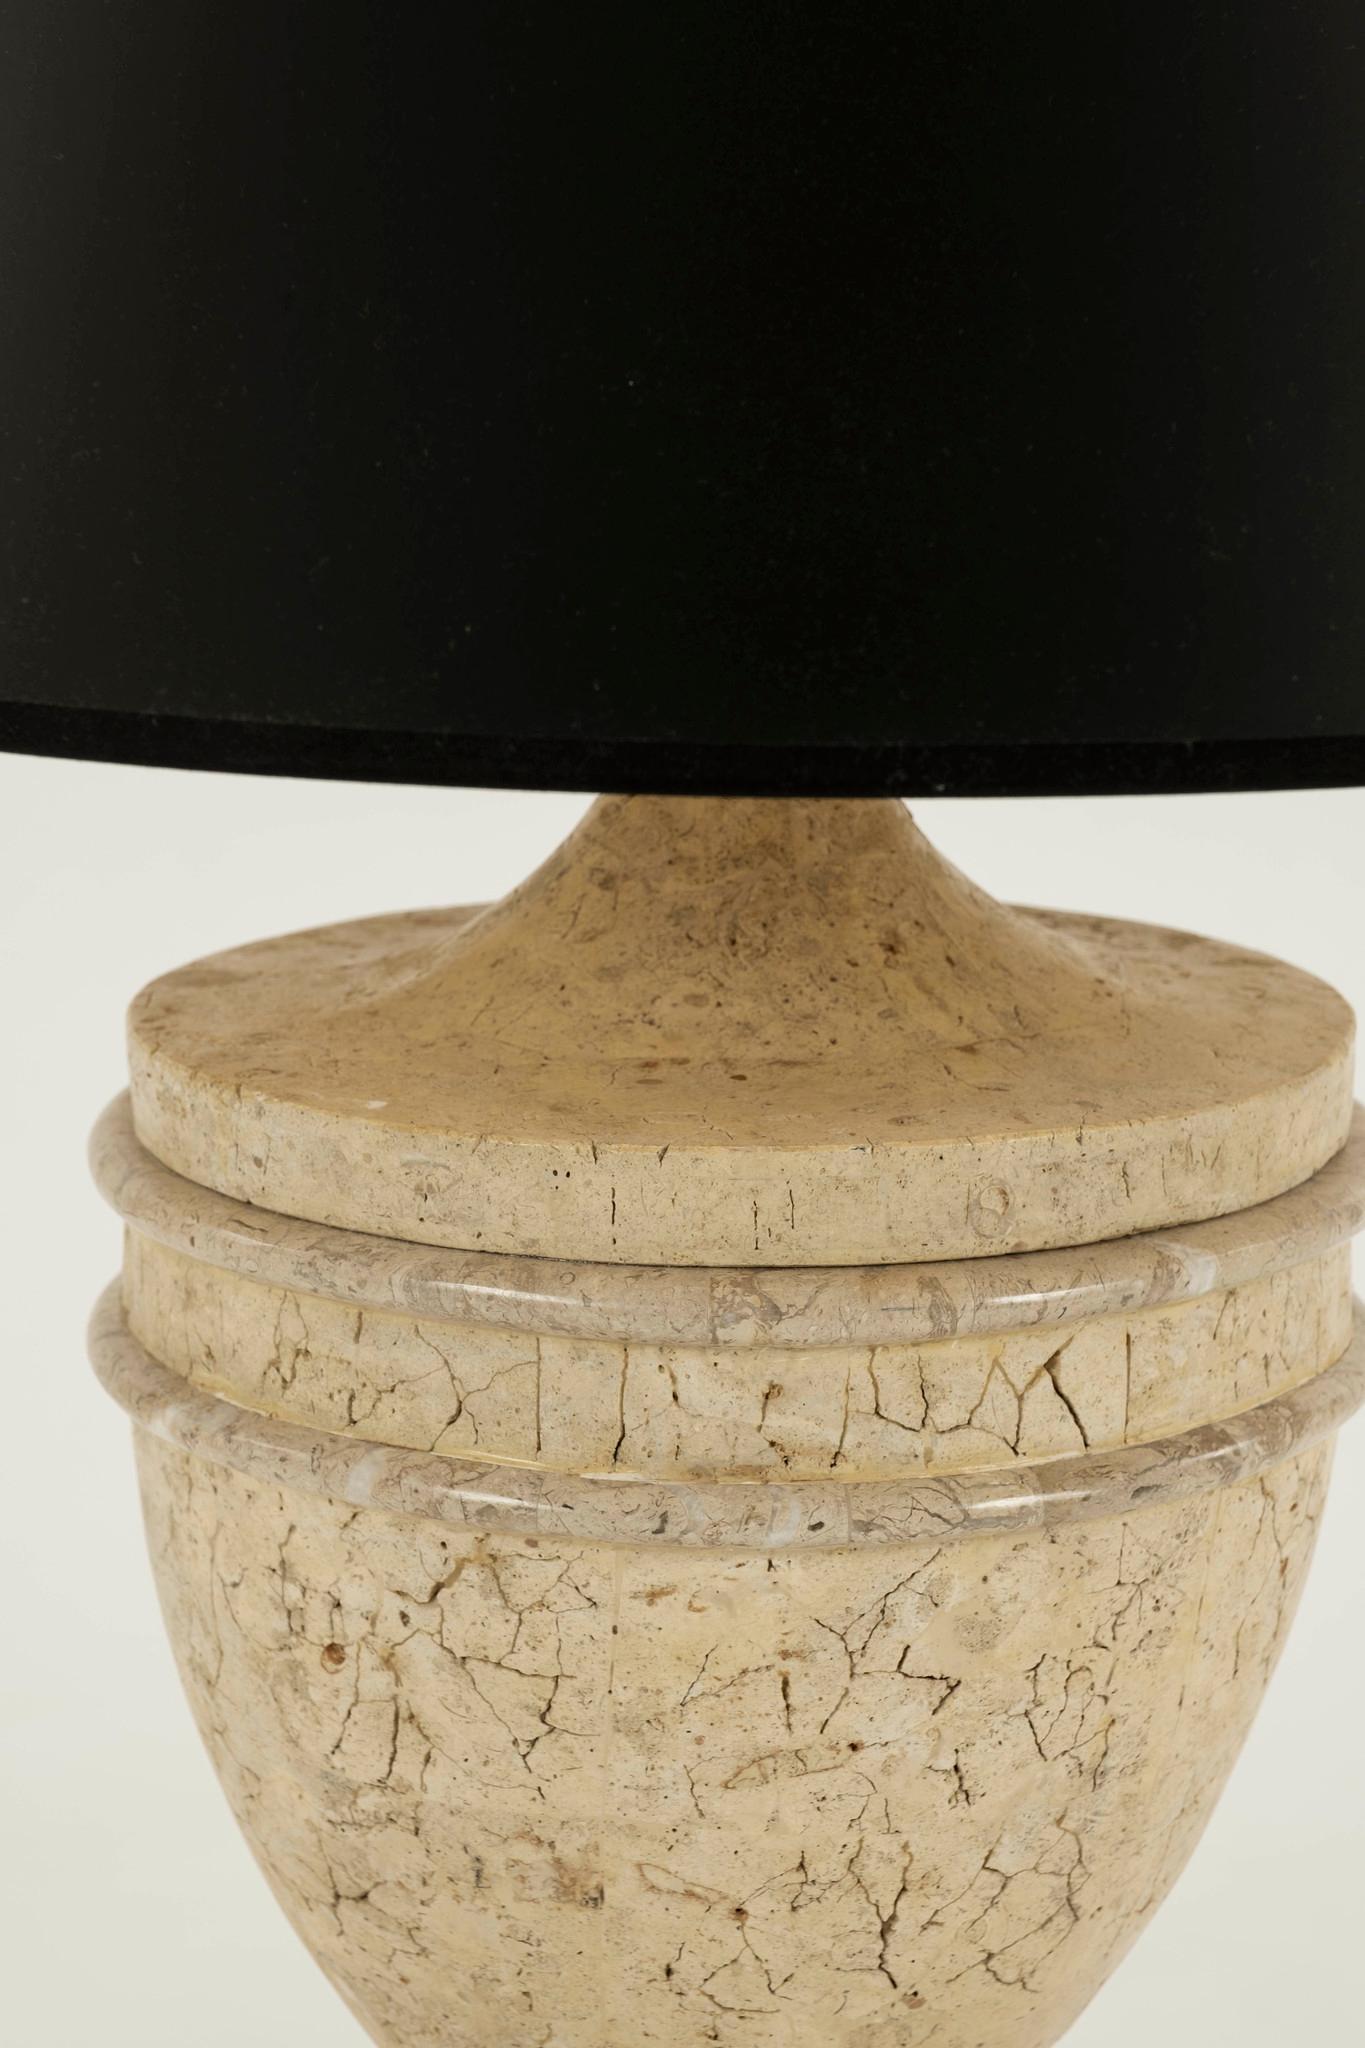 20th century neoclassical style stone table lamps. Handsome and stately beige urn on plinth base lamps with black shades.